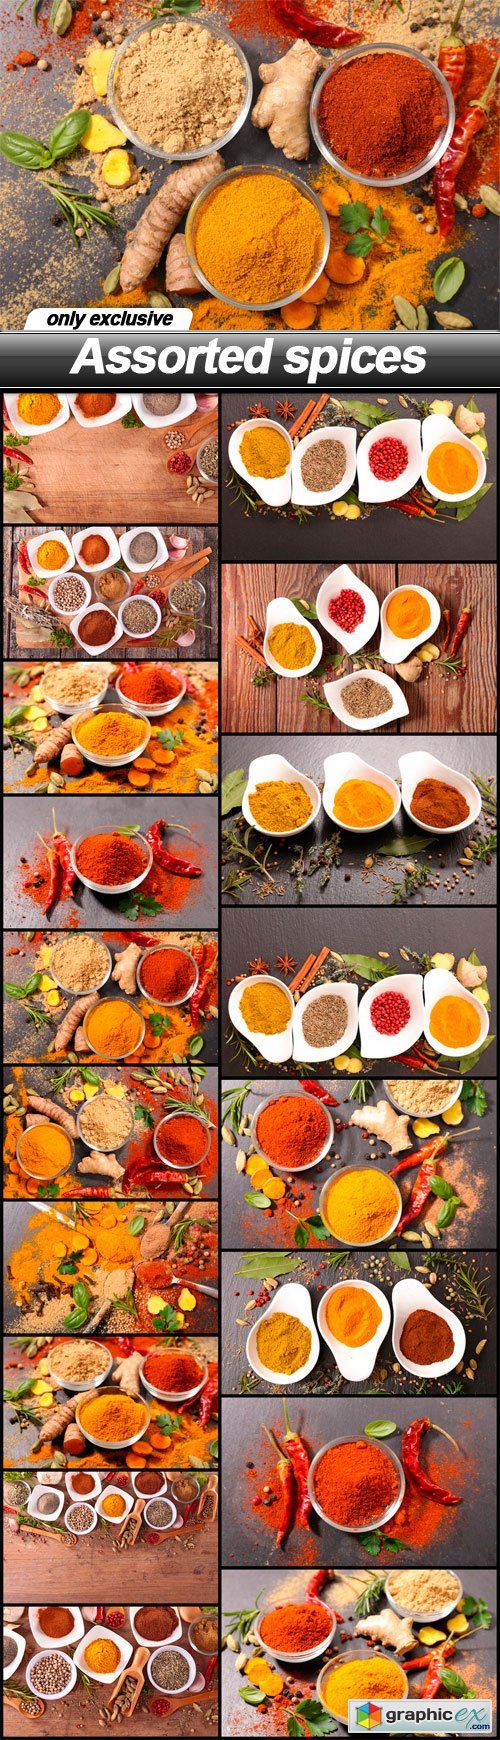 Assorted spices - 18 UHQ JPEG